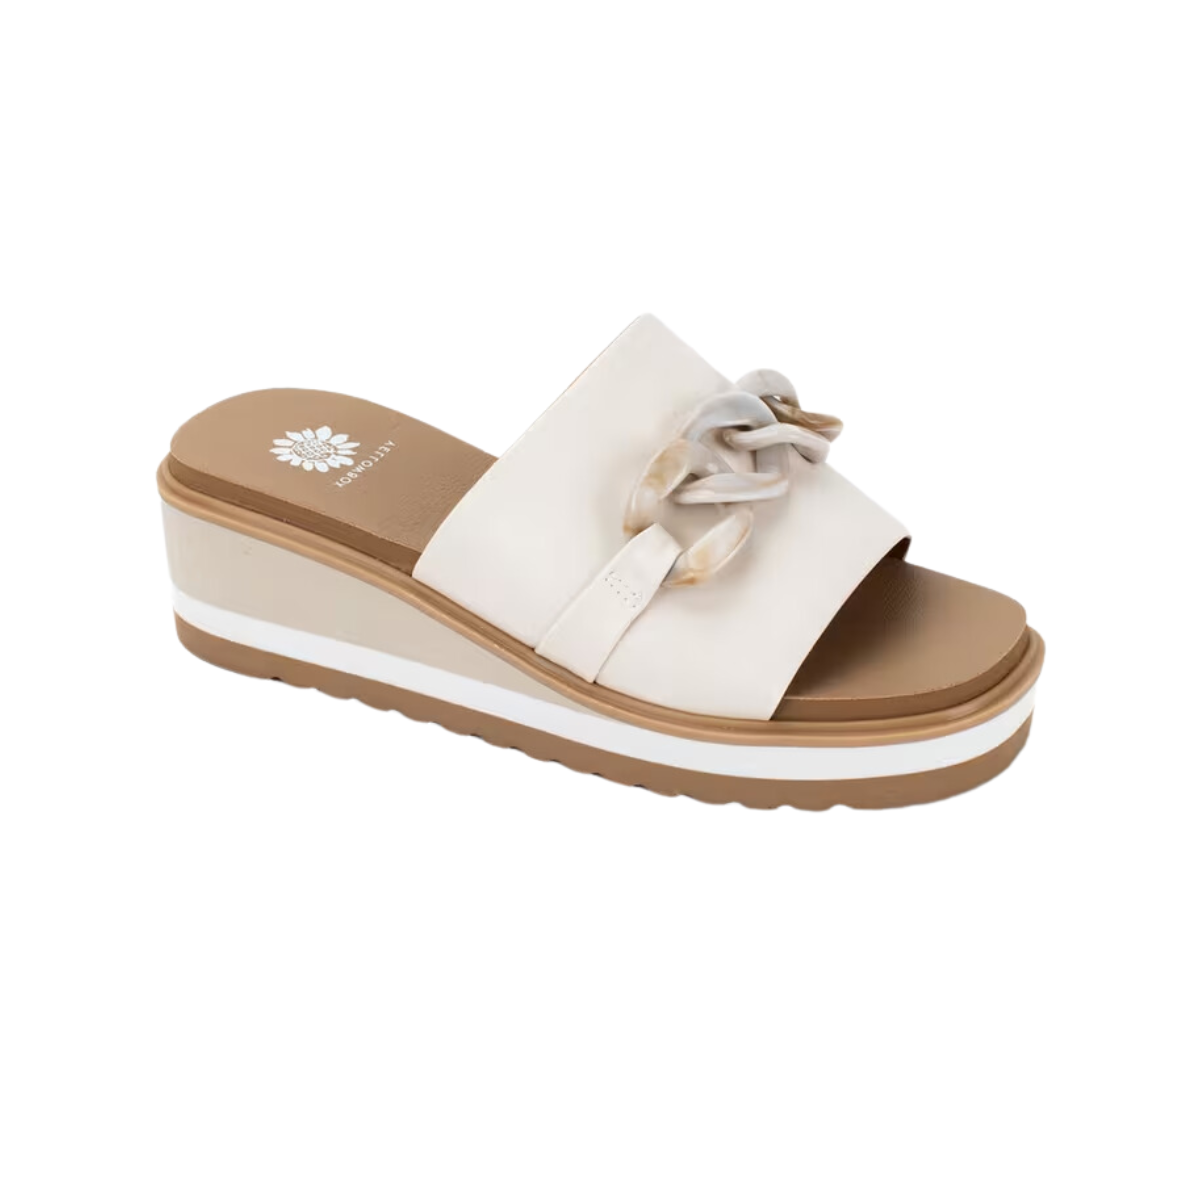 Women's Alora Wedge by Yellow Box with a knotted strap detail, combining comfort and style.